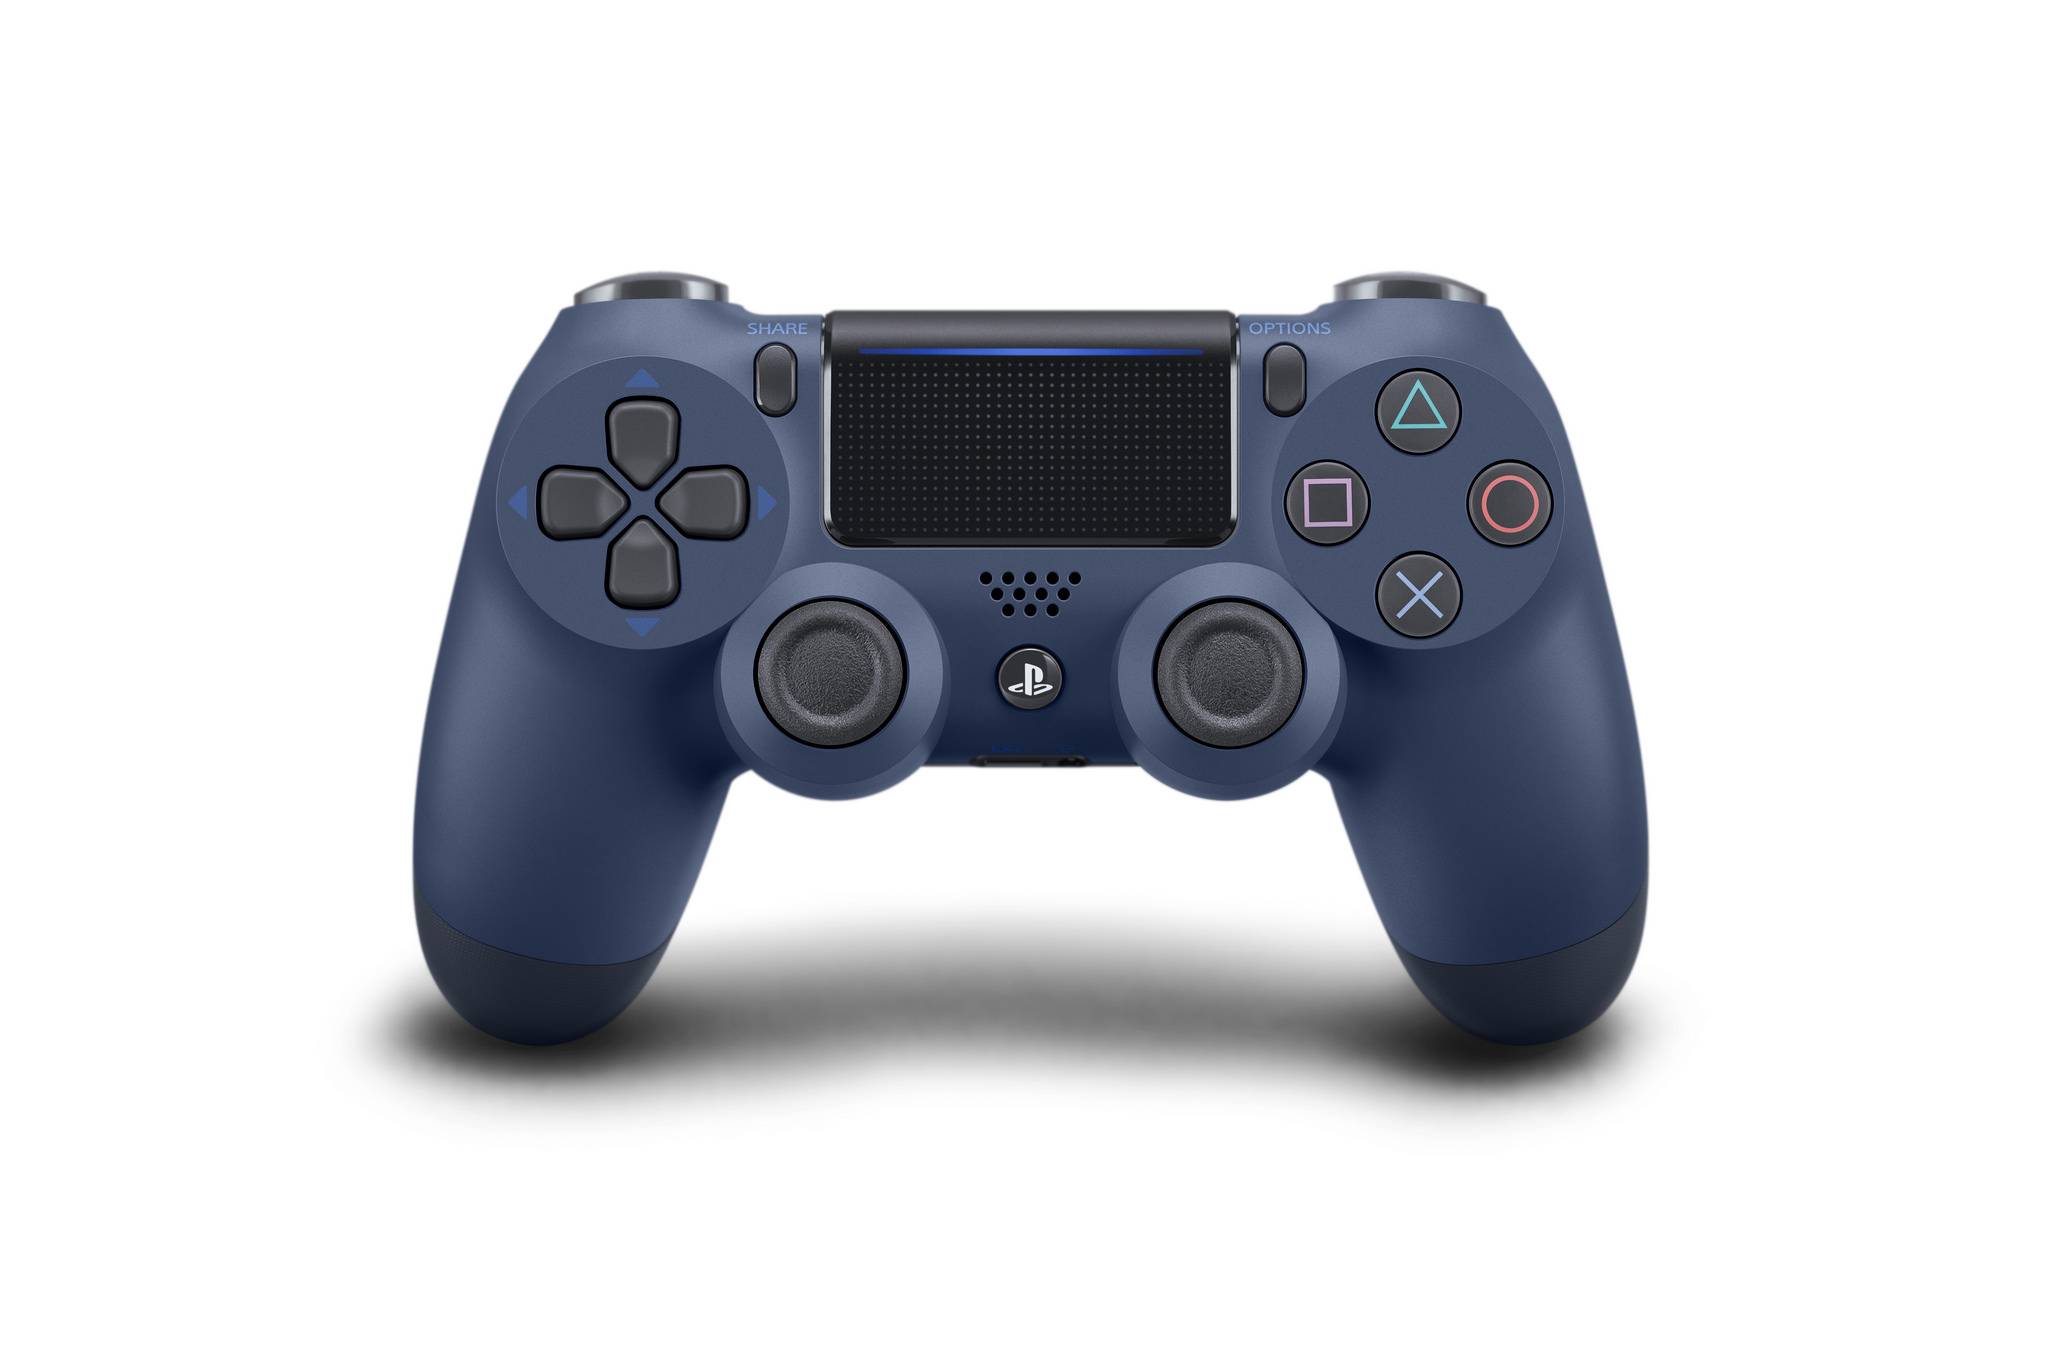 A picture of the new Sony Playstation Dualshock 4 controller in Midnight Blue